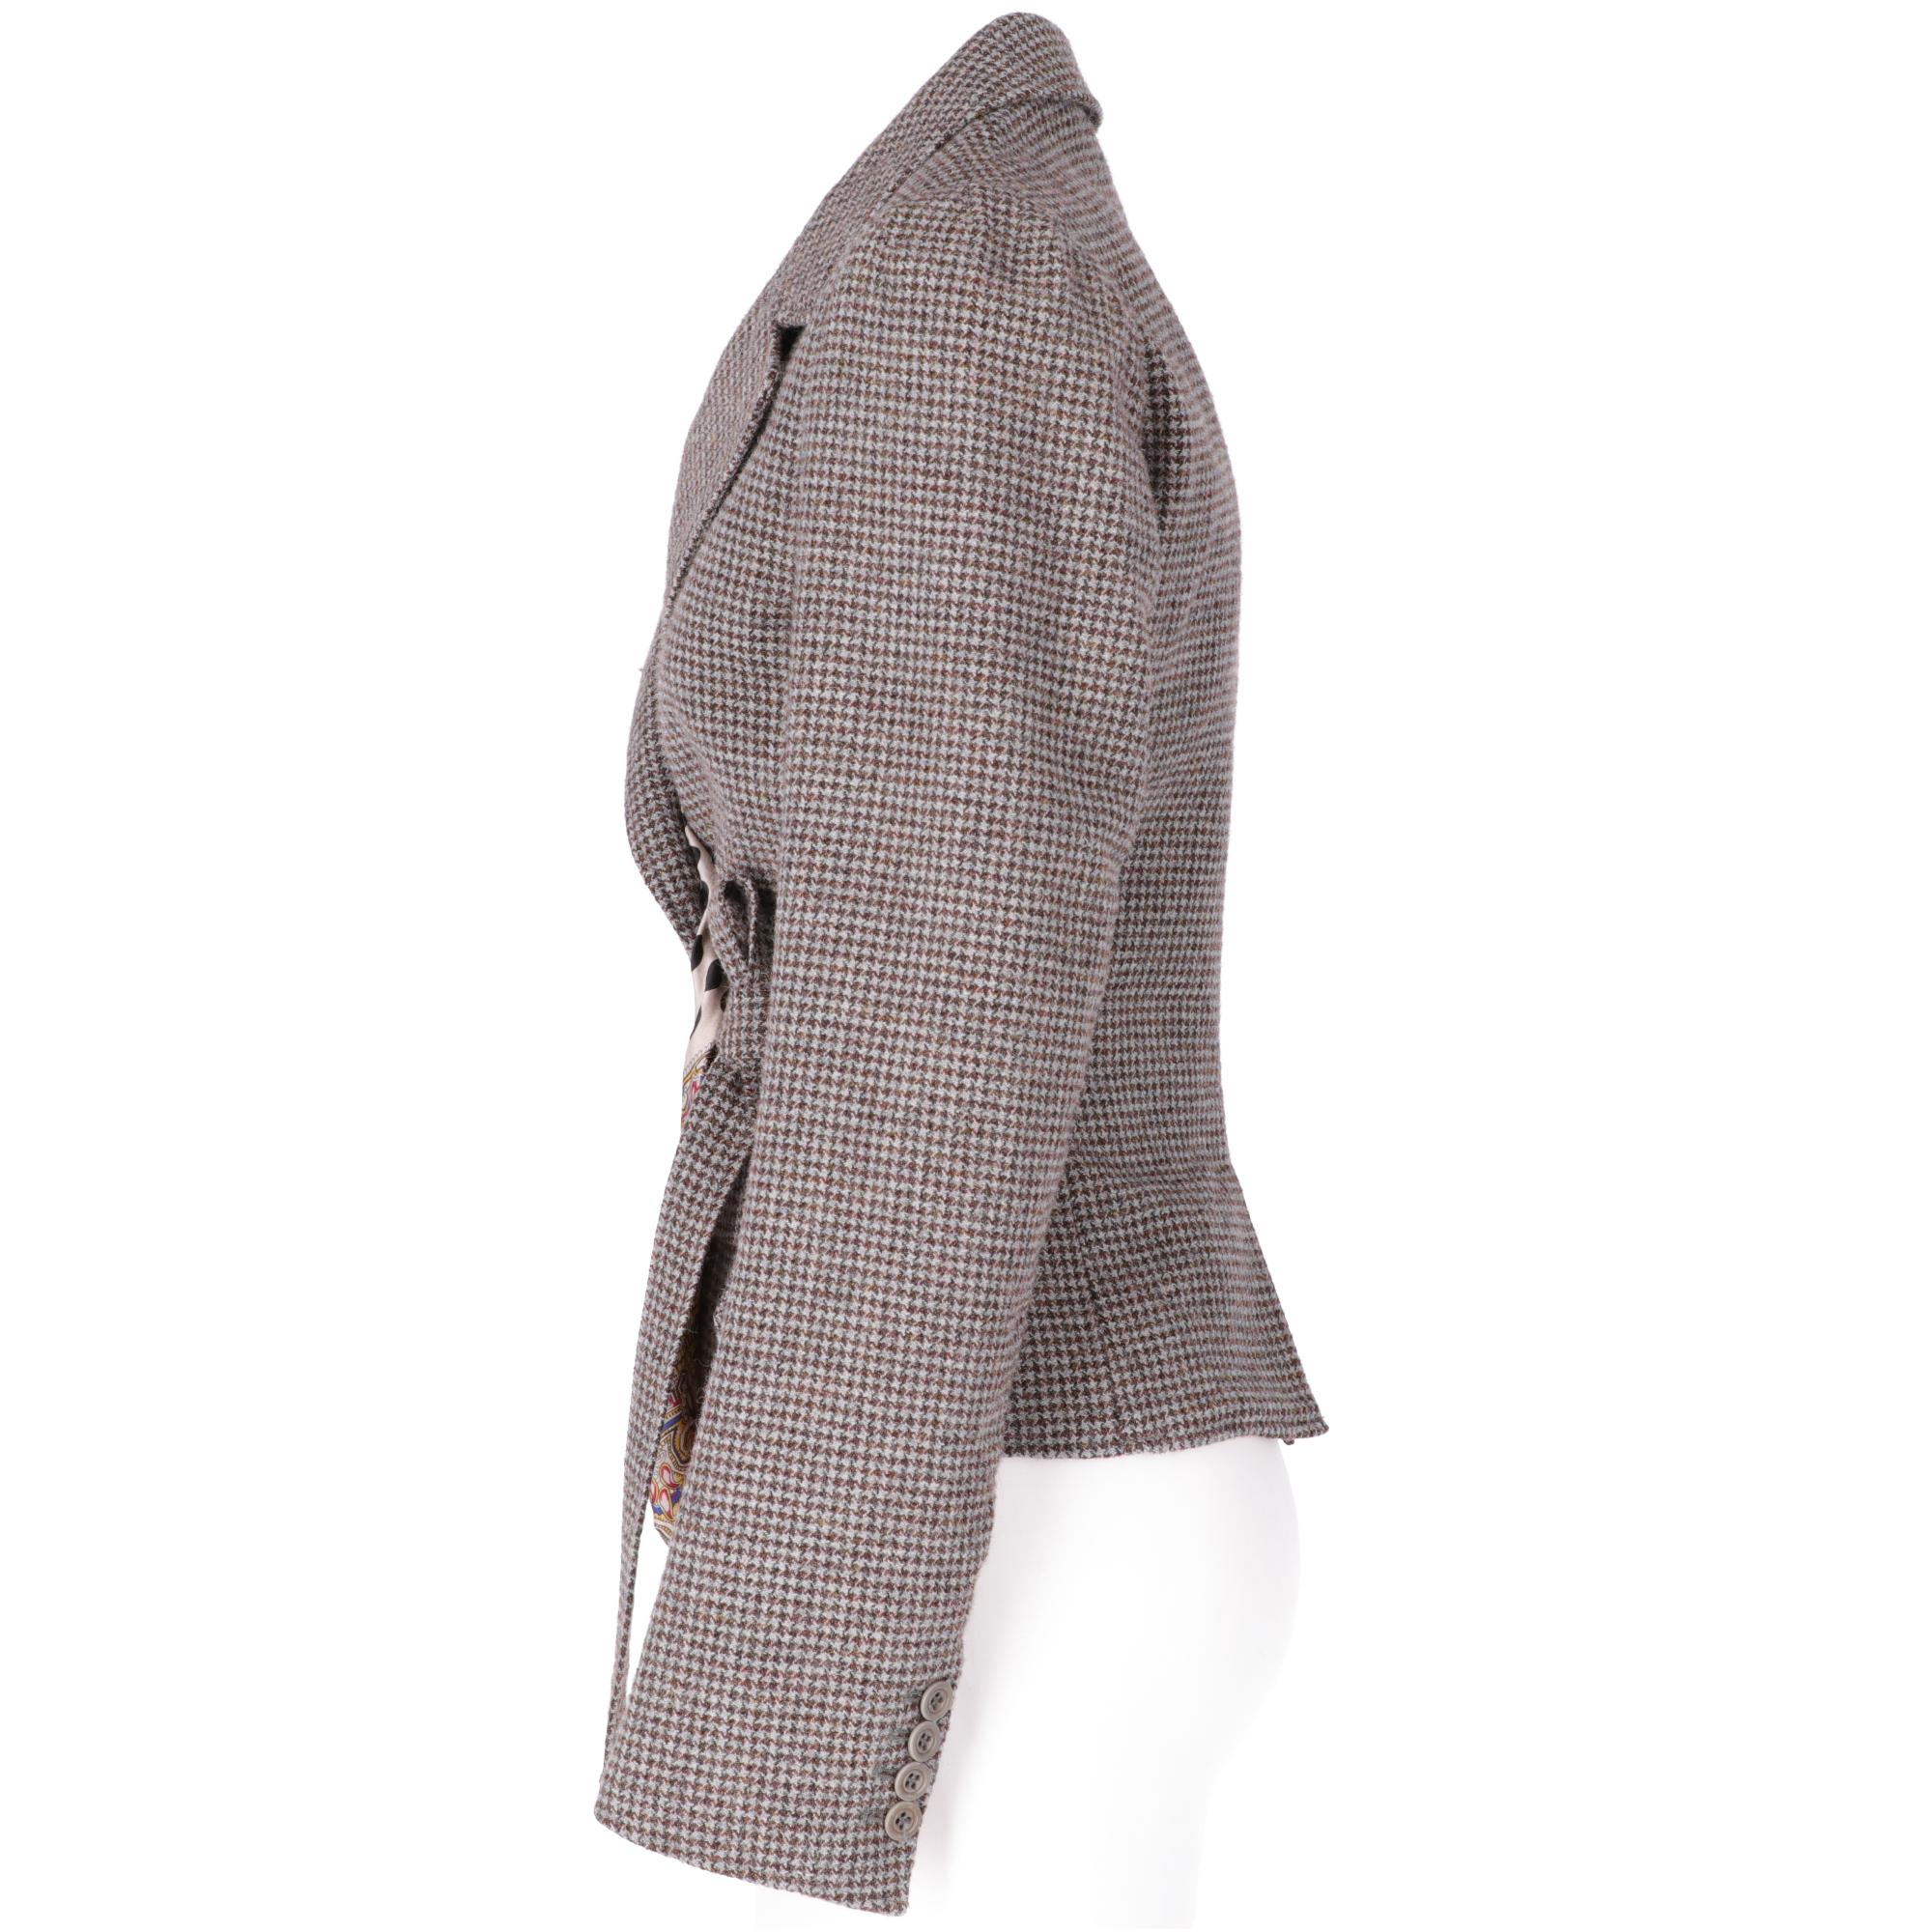 Dries Van Noten wool jacket with houndstooth pattern in shades of gray, brown and black, classic reverse collar, drawstring closure, long sleeves, welt pockets with flap. Lined in patterned silk.

Years: 2000s

Made in Slovenia

Size: 38 IT

Linear